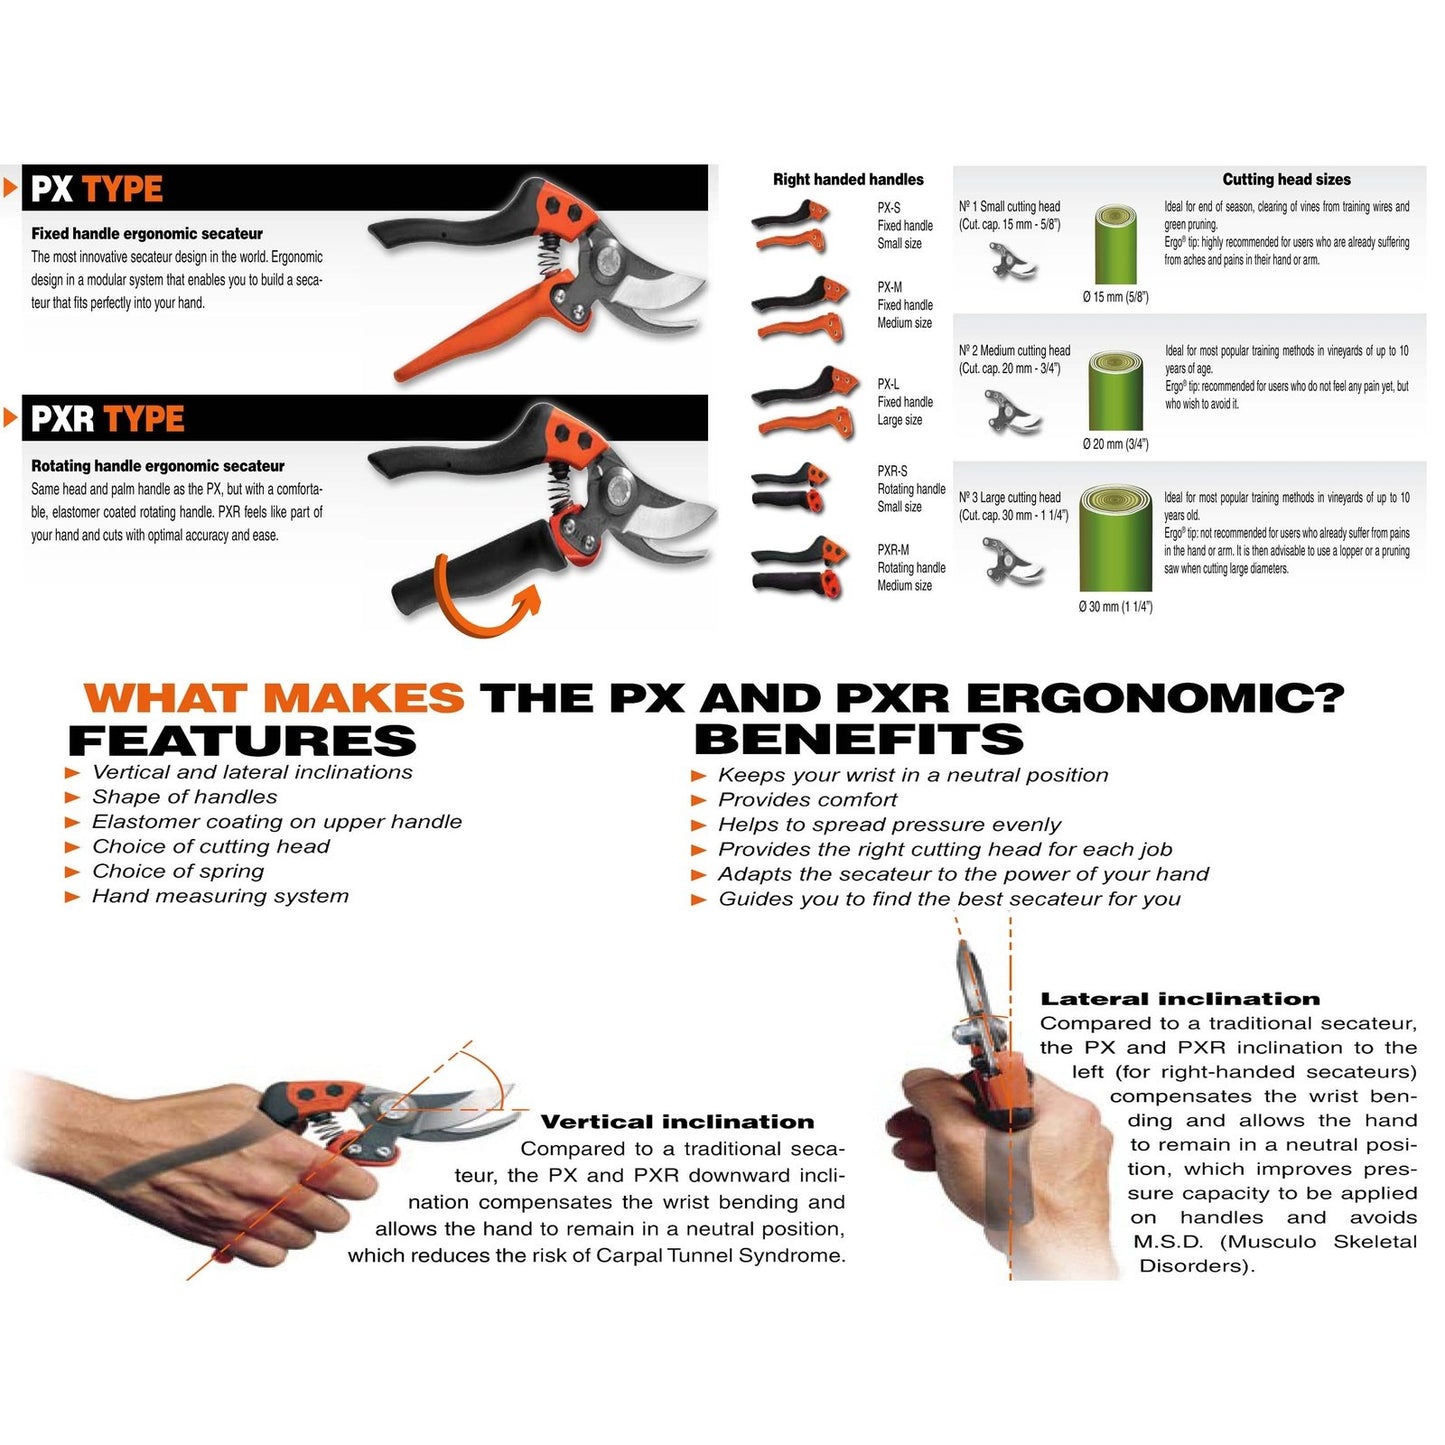 Bahco Professional Small Grip Bypass Pruner PX-S2